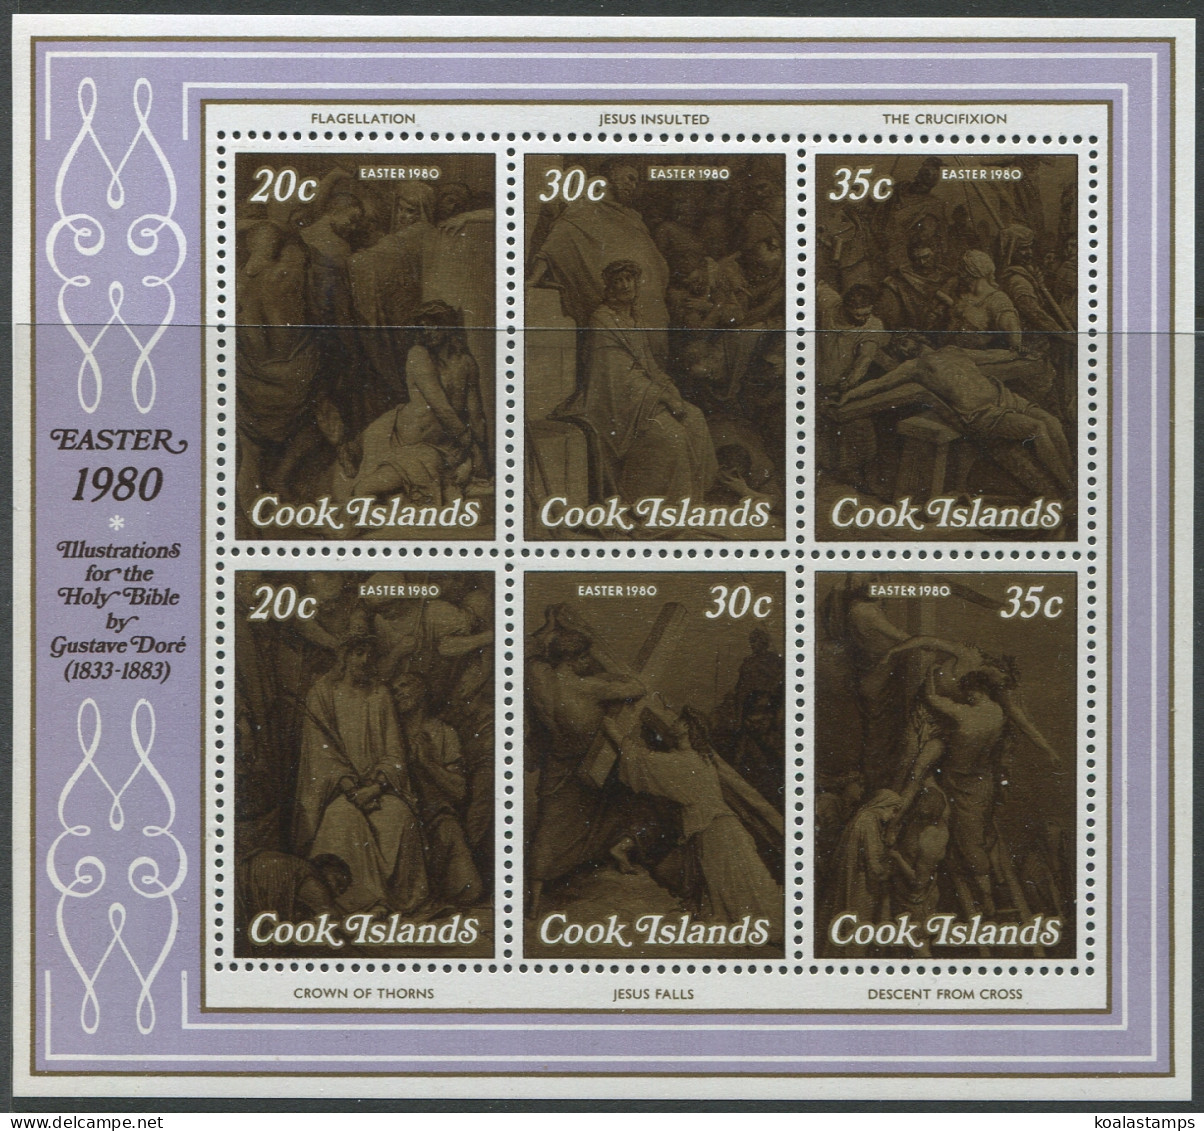 Cook Islands 1980 SG681 Easter MS MNH - Cook